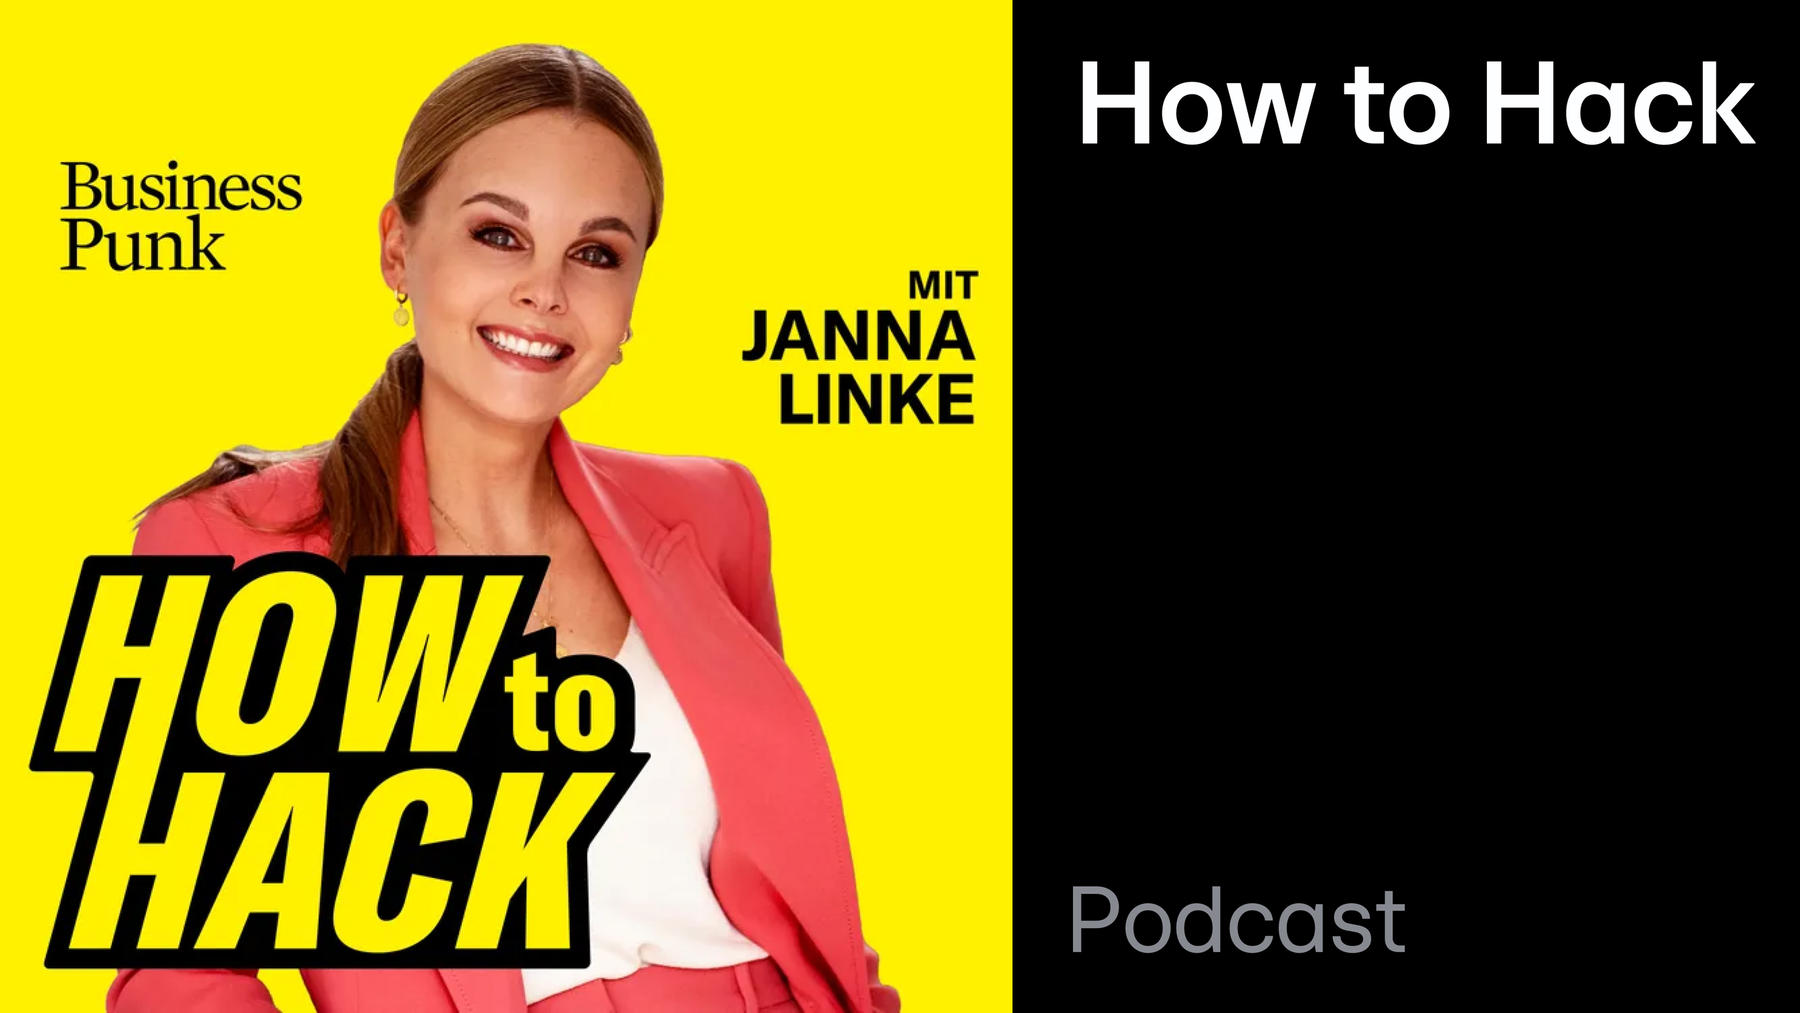 Podcast: Business Punk – How to Hack